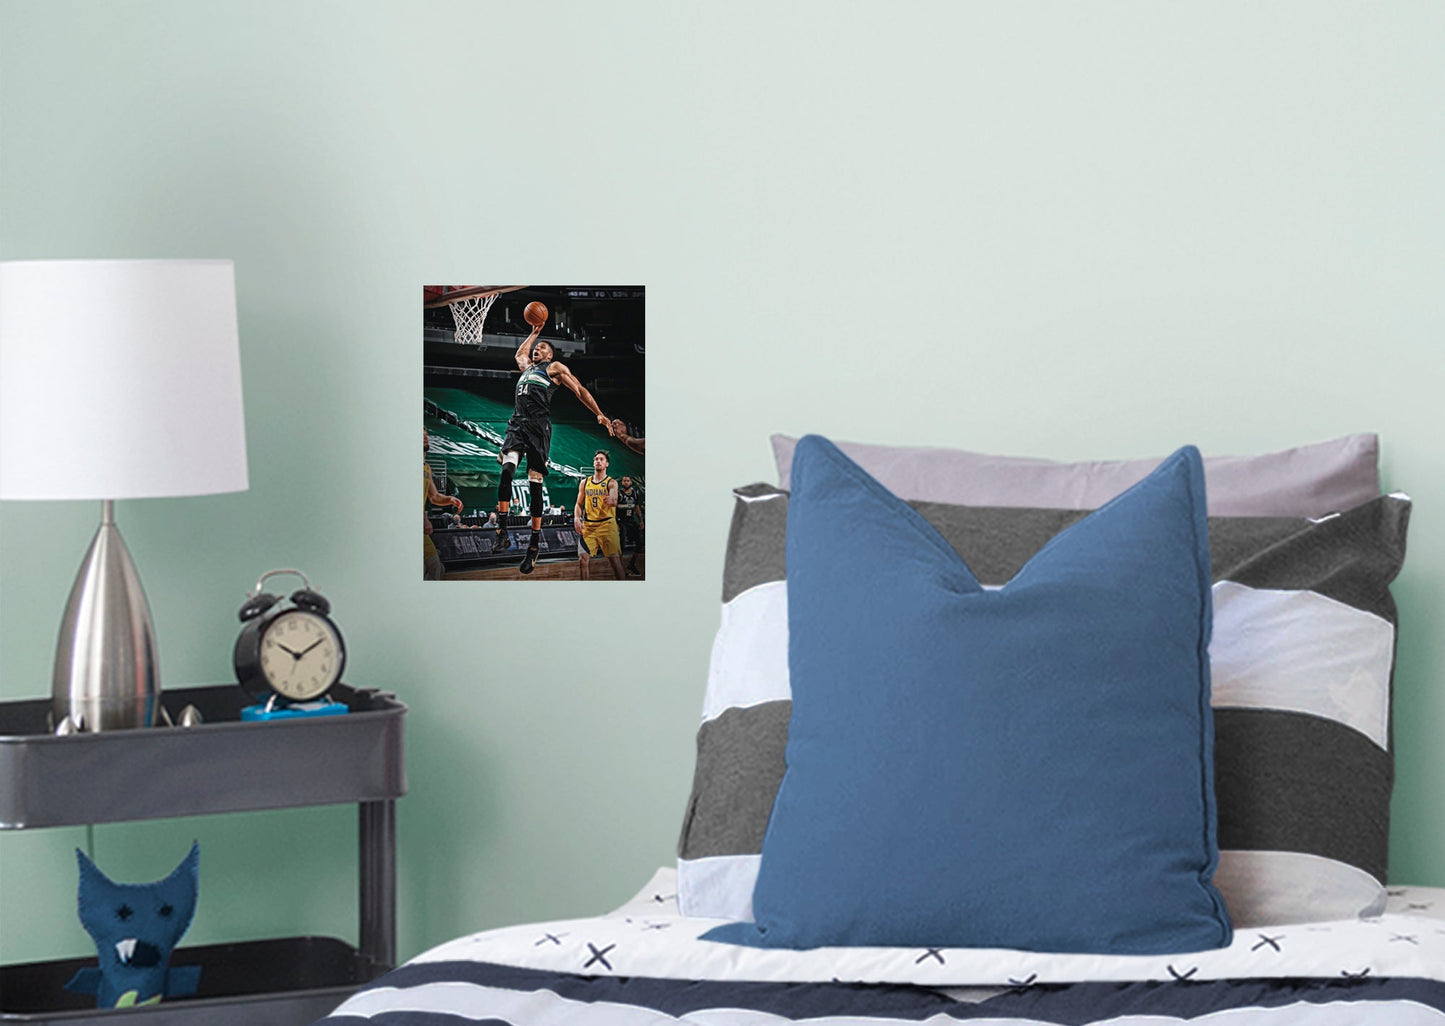 Milwaukee Bucks: Giannis Antetokounmpo  Dunk Mural        - Officially Licensed NBA Removable Wall   Adhesive Decal